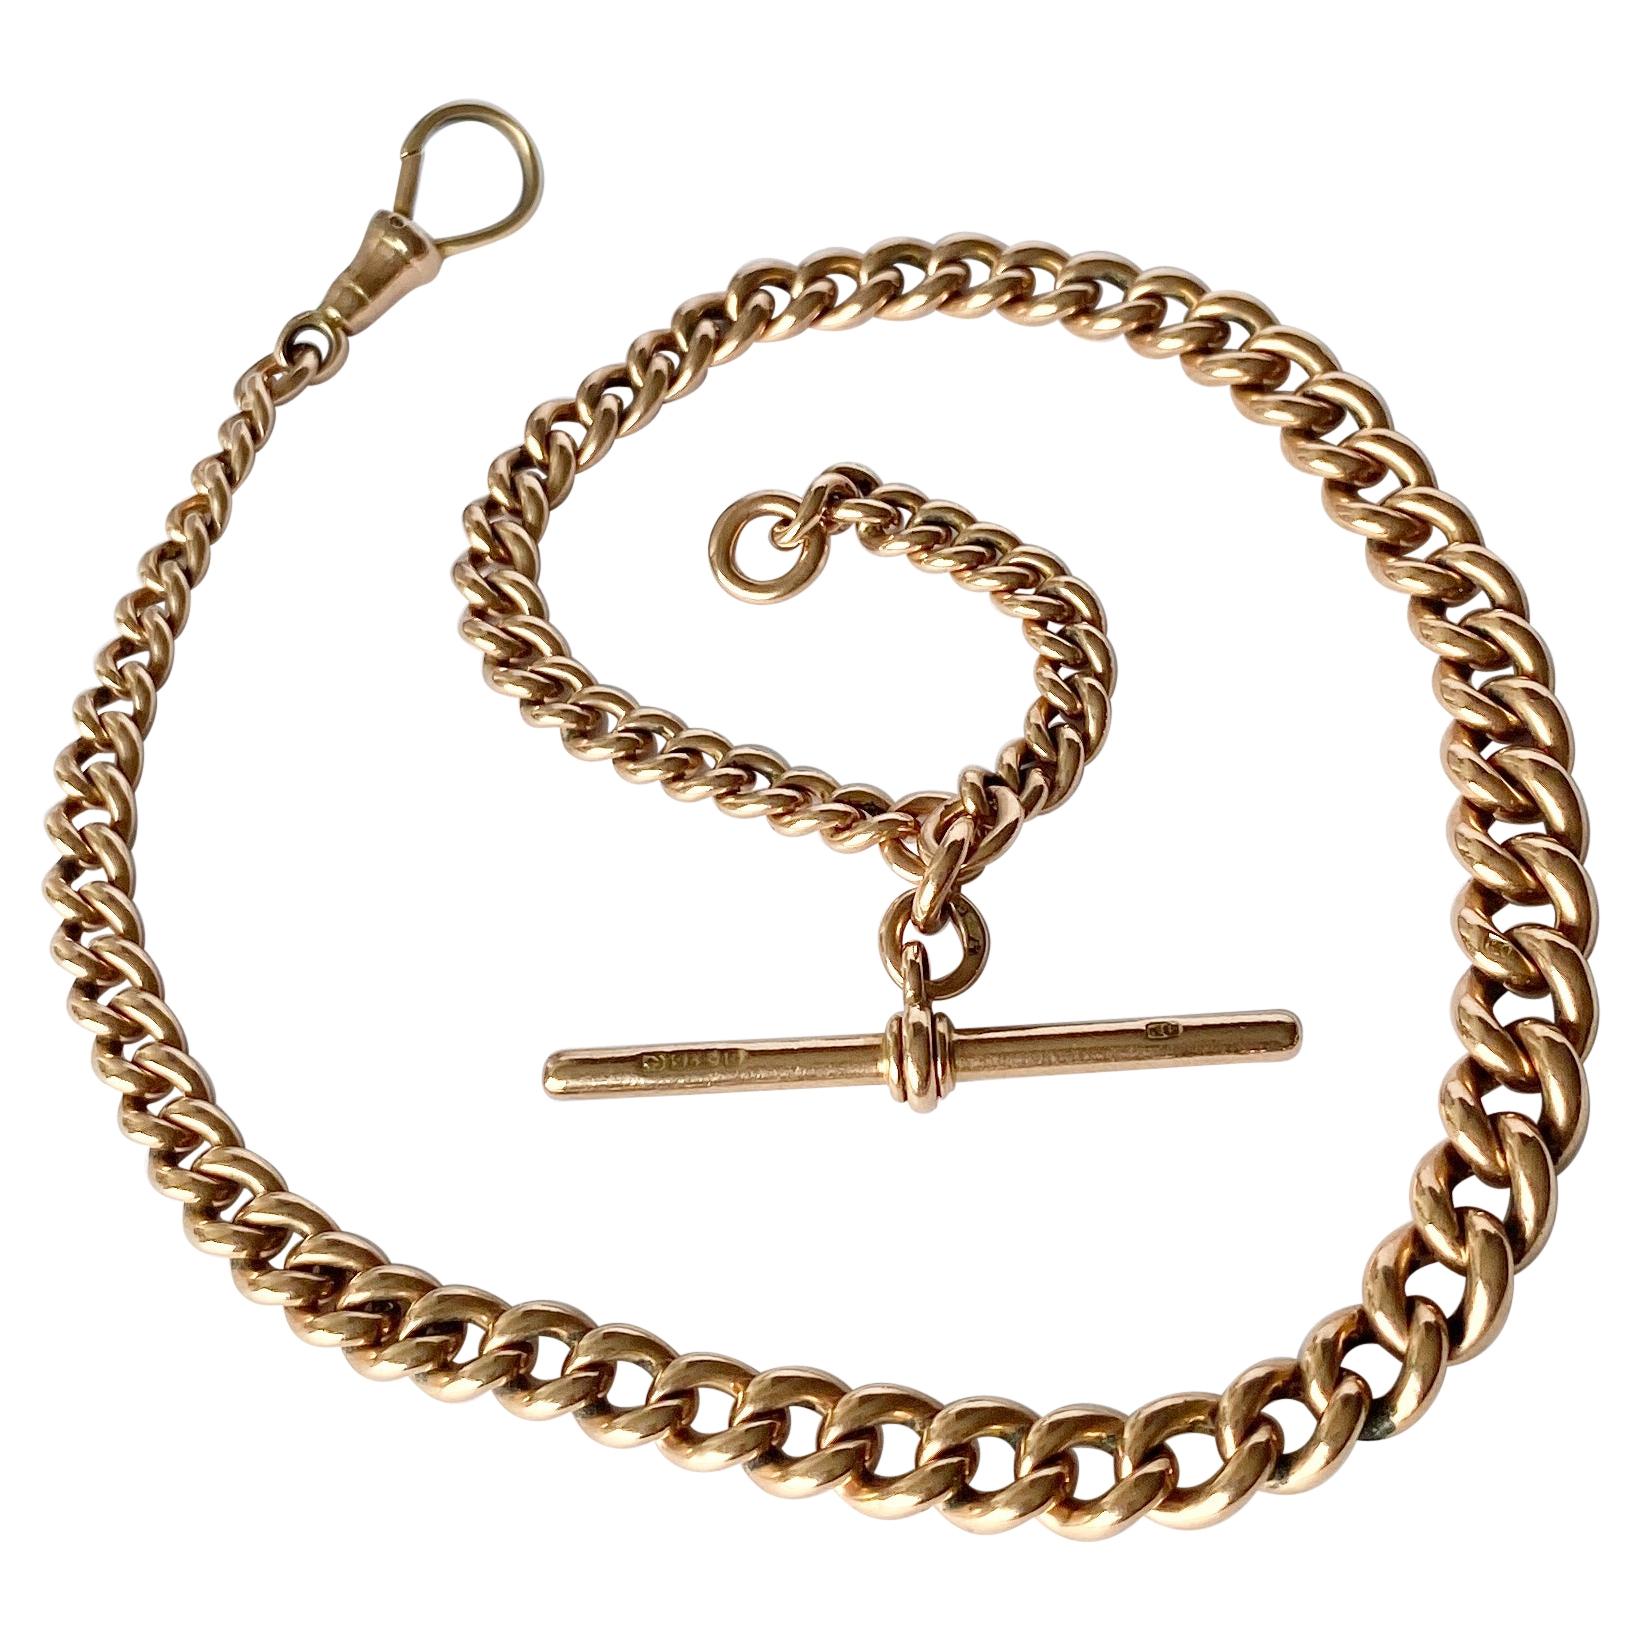 Antique 9ct Albert Chain, T-Bar & Fob 1926 at Segal's Jewellers